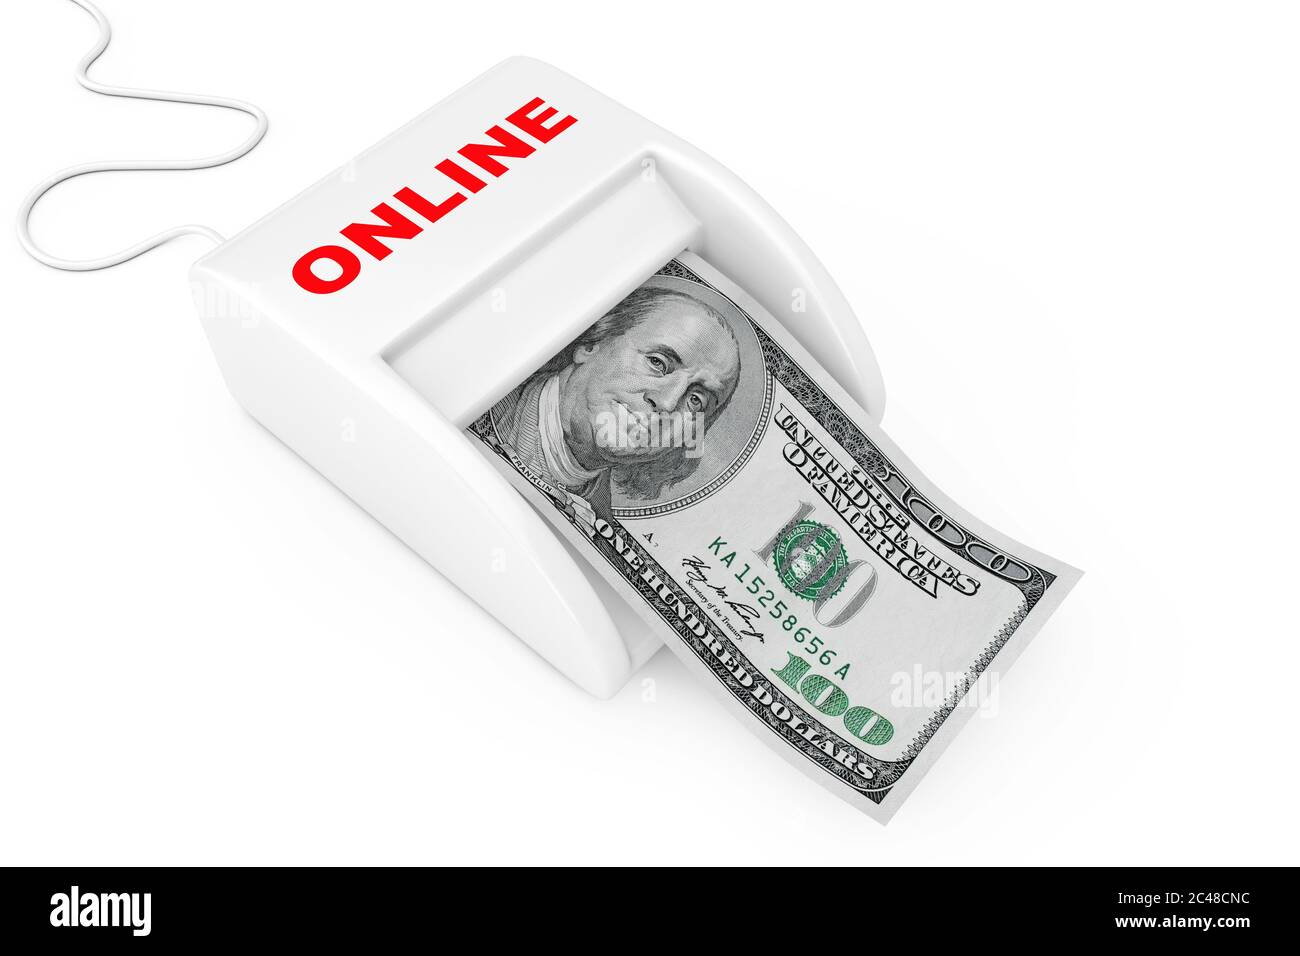 Make Money Online Concept. Money Maker Online Machine with Dollars Banknote  on a white background. 3d Rendering Stock Photo - Alamy